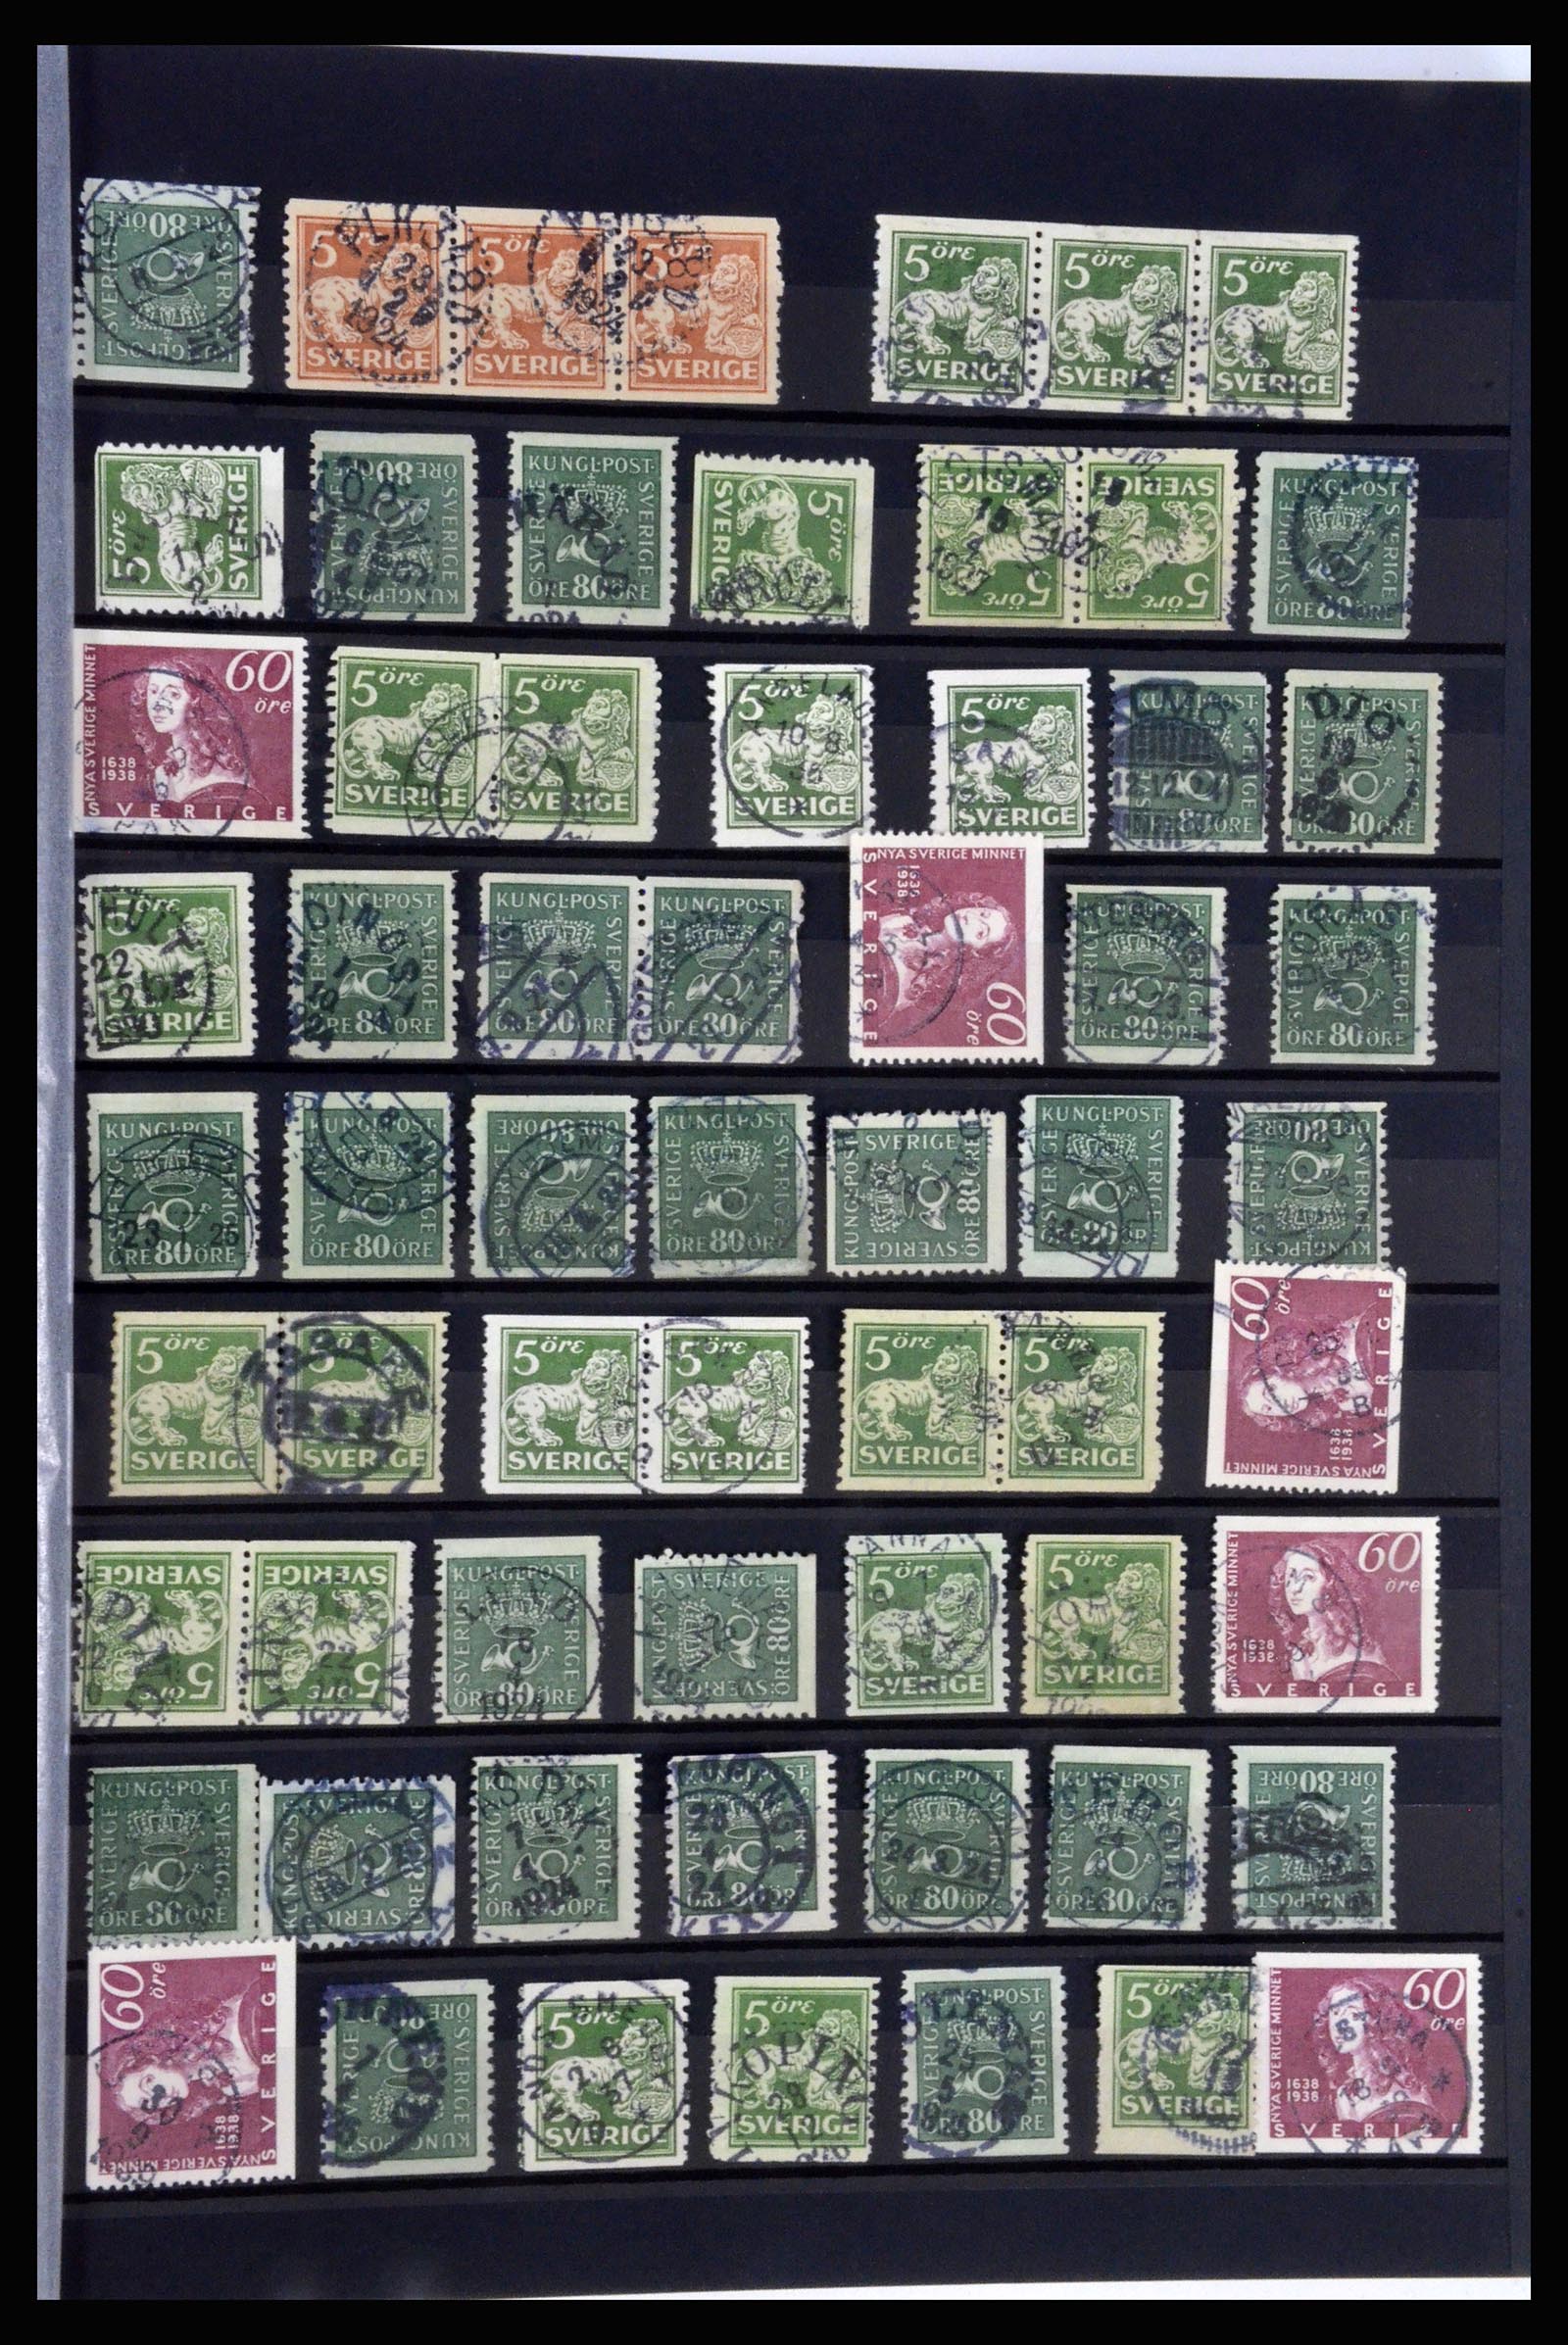 36316 017 - Stamp collection 36316 Sweden cancellations 1920-1938.